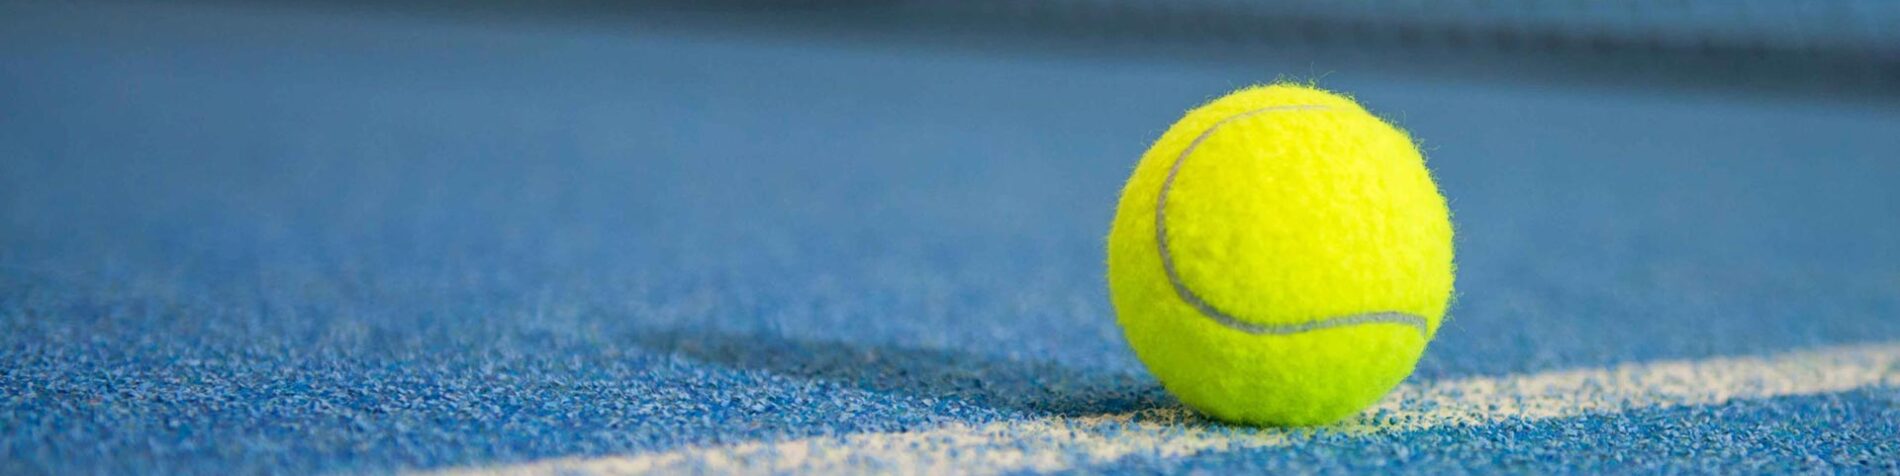 SAP and Qualtrics Uncover Player Insights Around WTA’s Return to Play